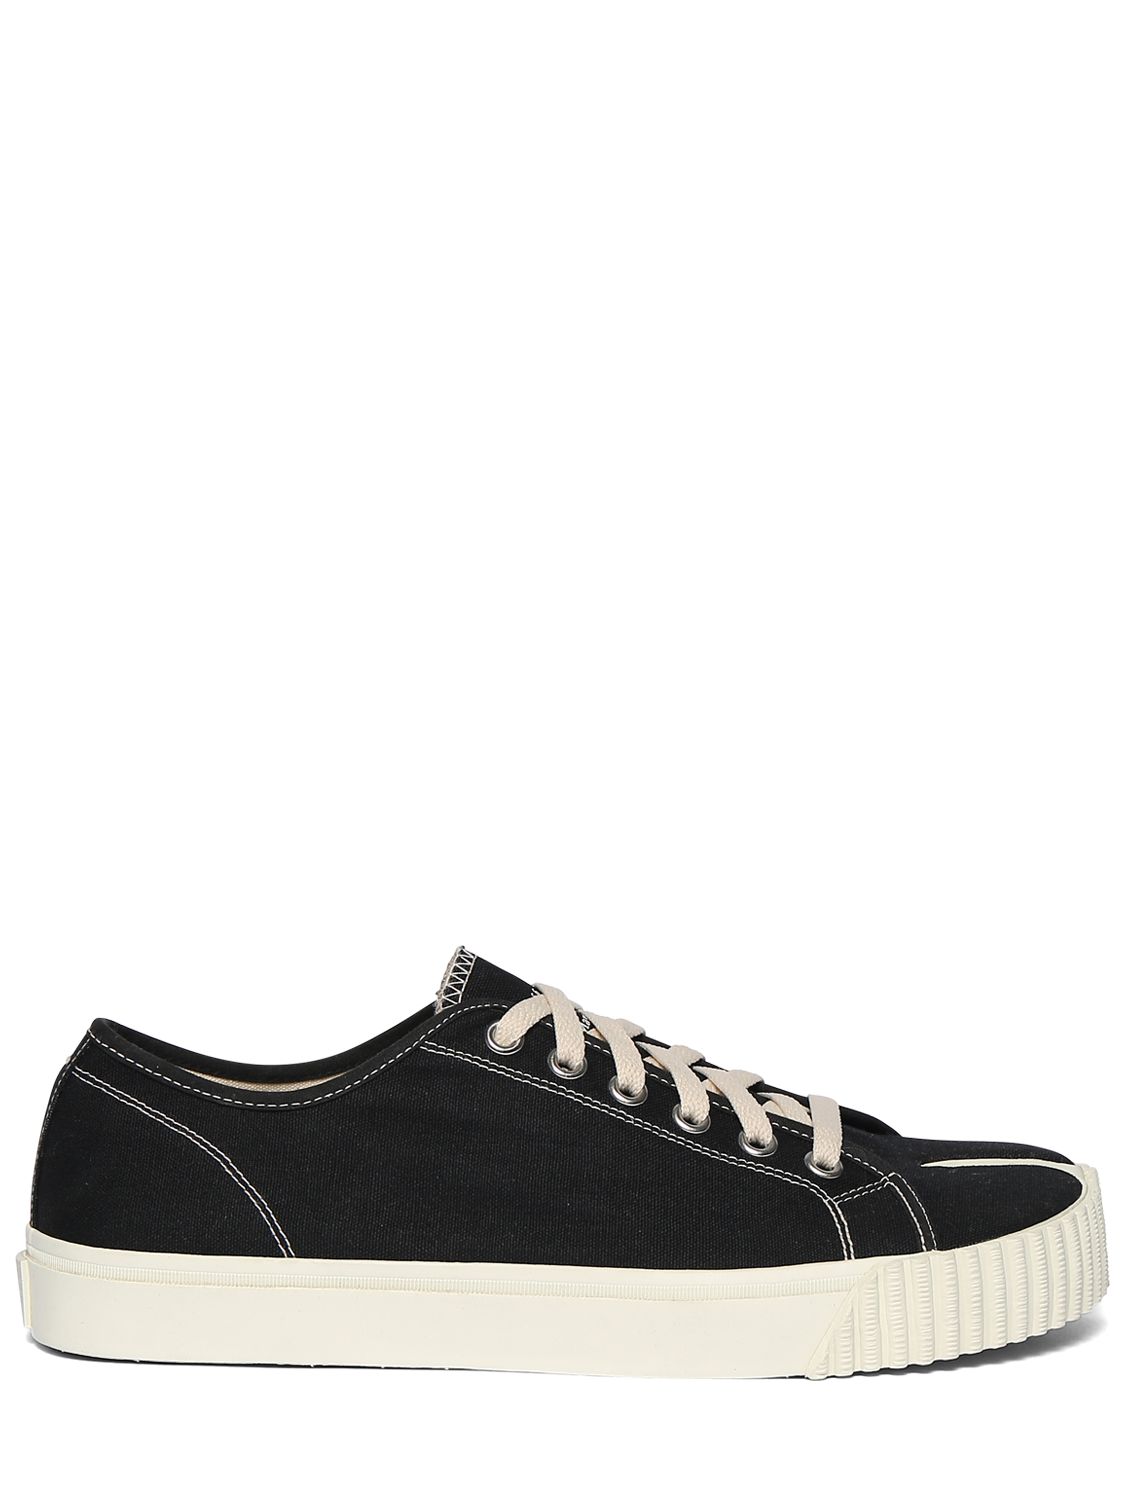 Tabi Cotton Canvas Low Top Sneakers